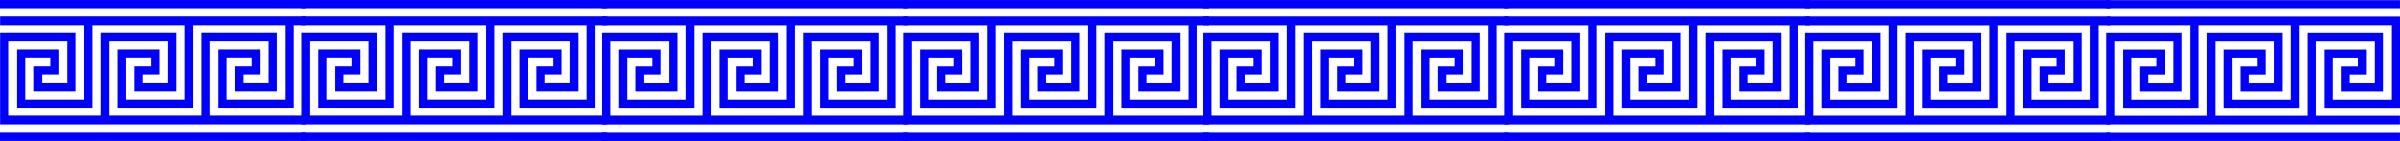 Blue Greek Key With Lines Border png